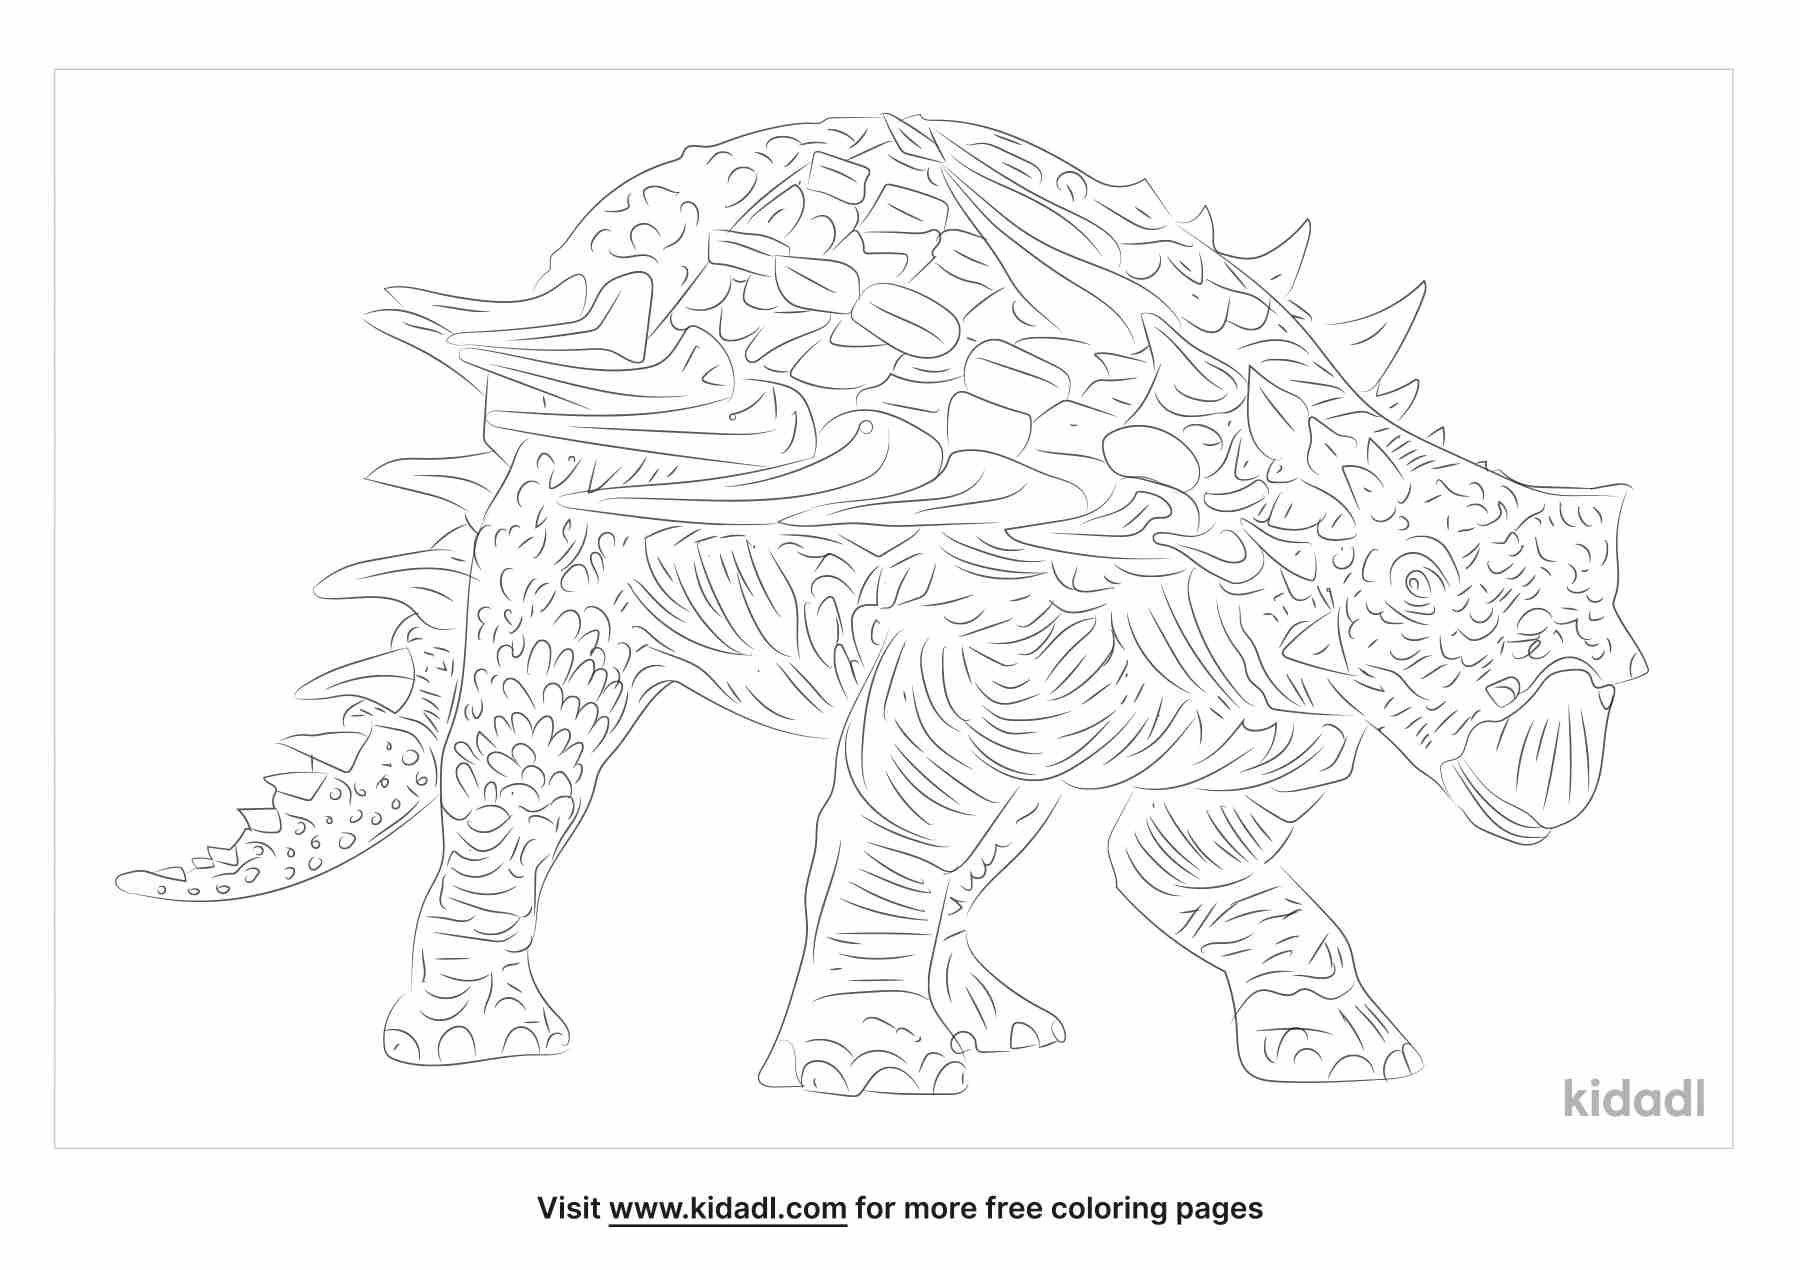 Fun polacanthus coloring pages for kids.